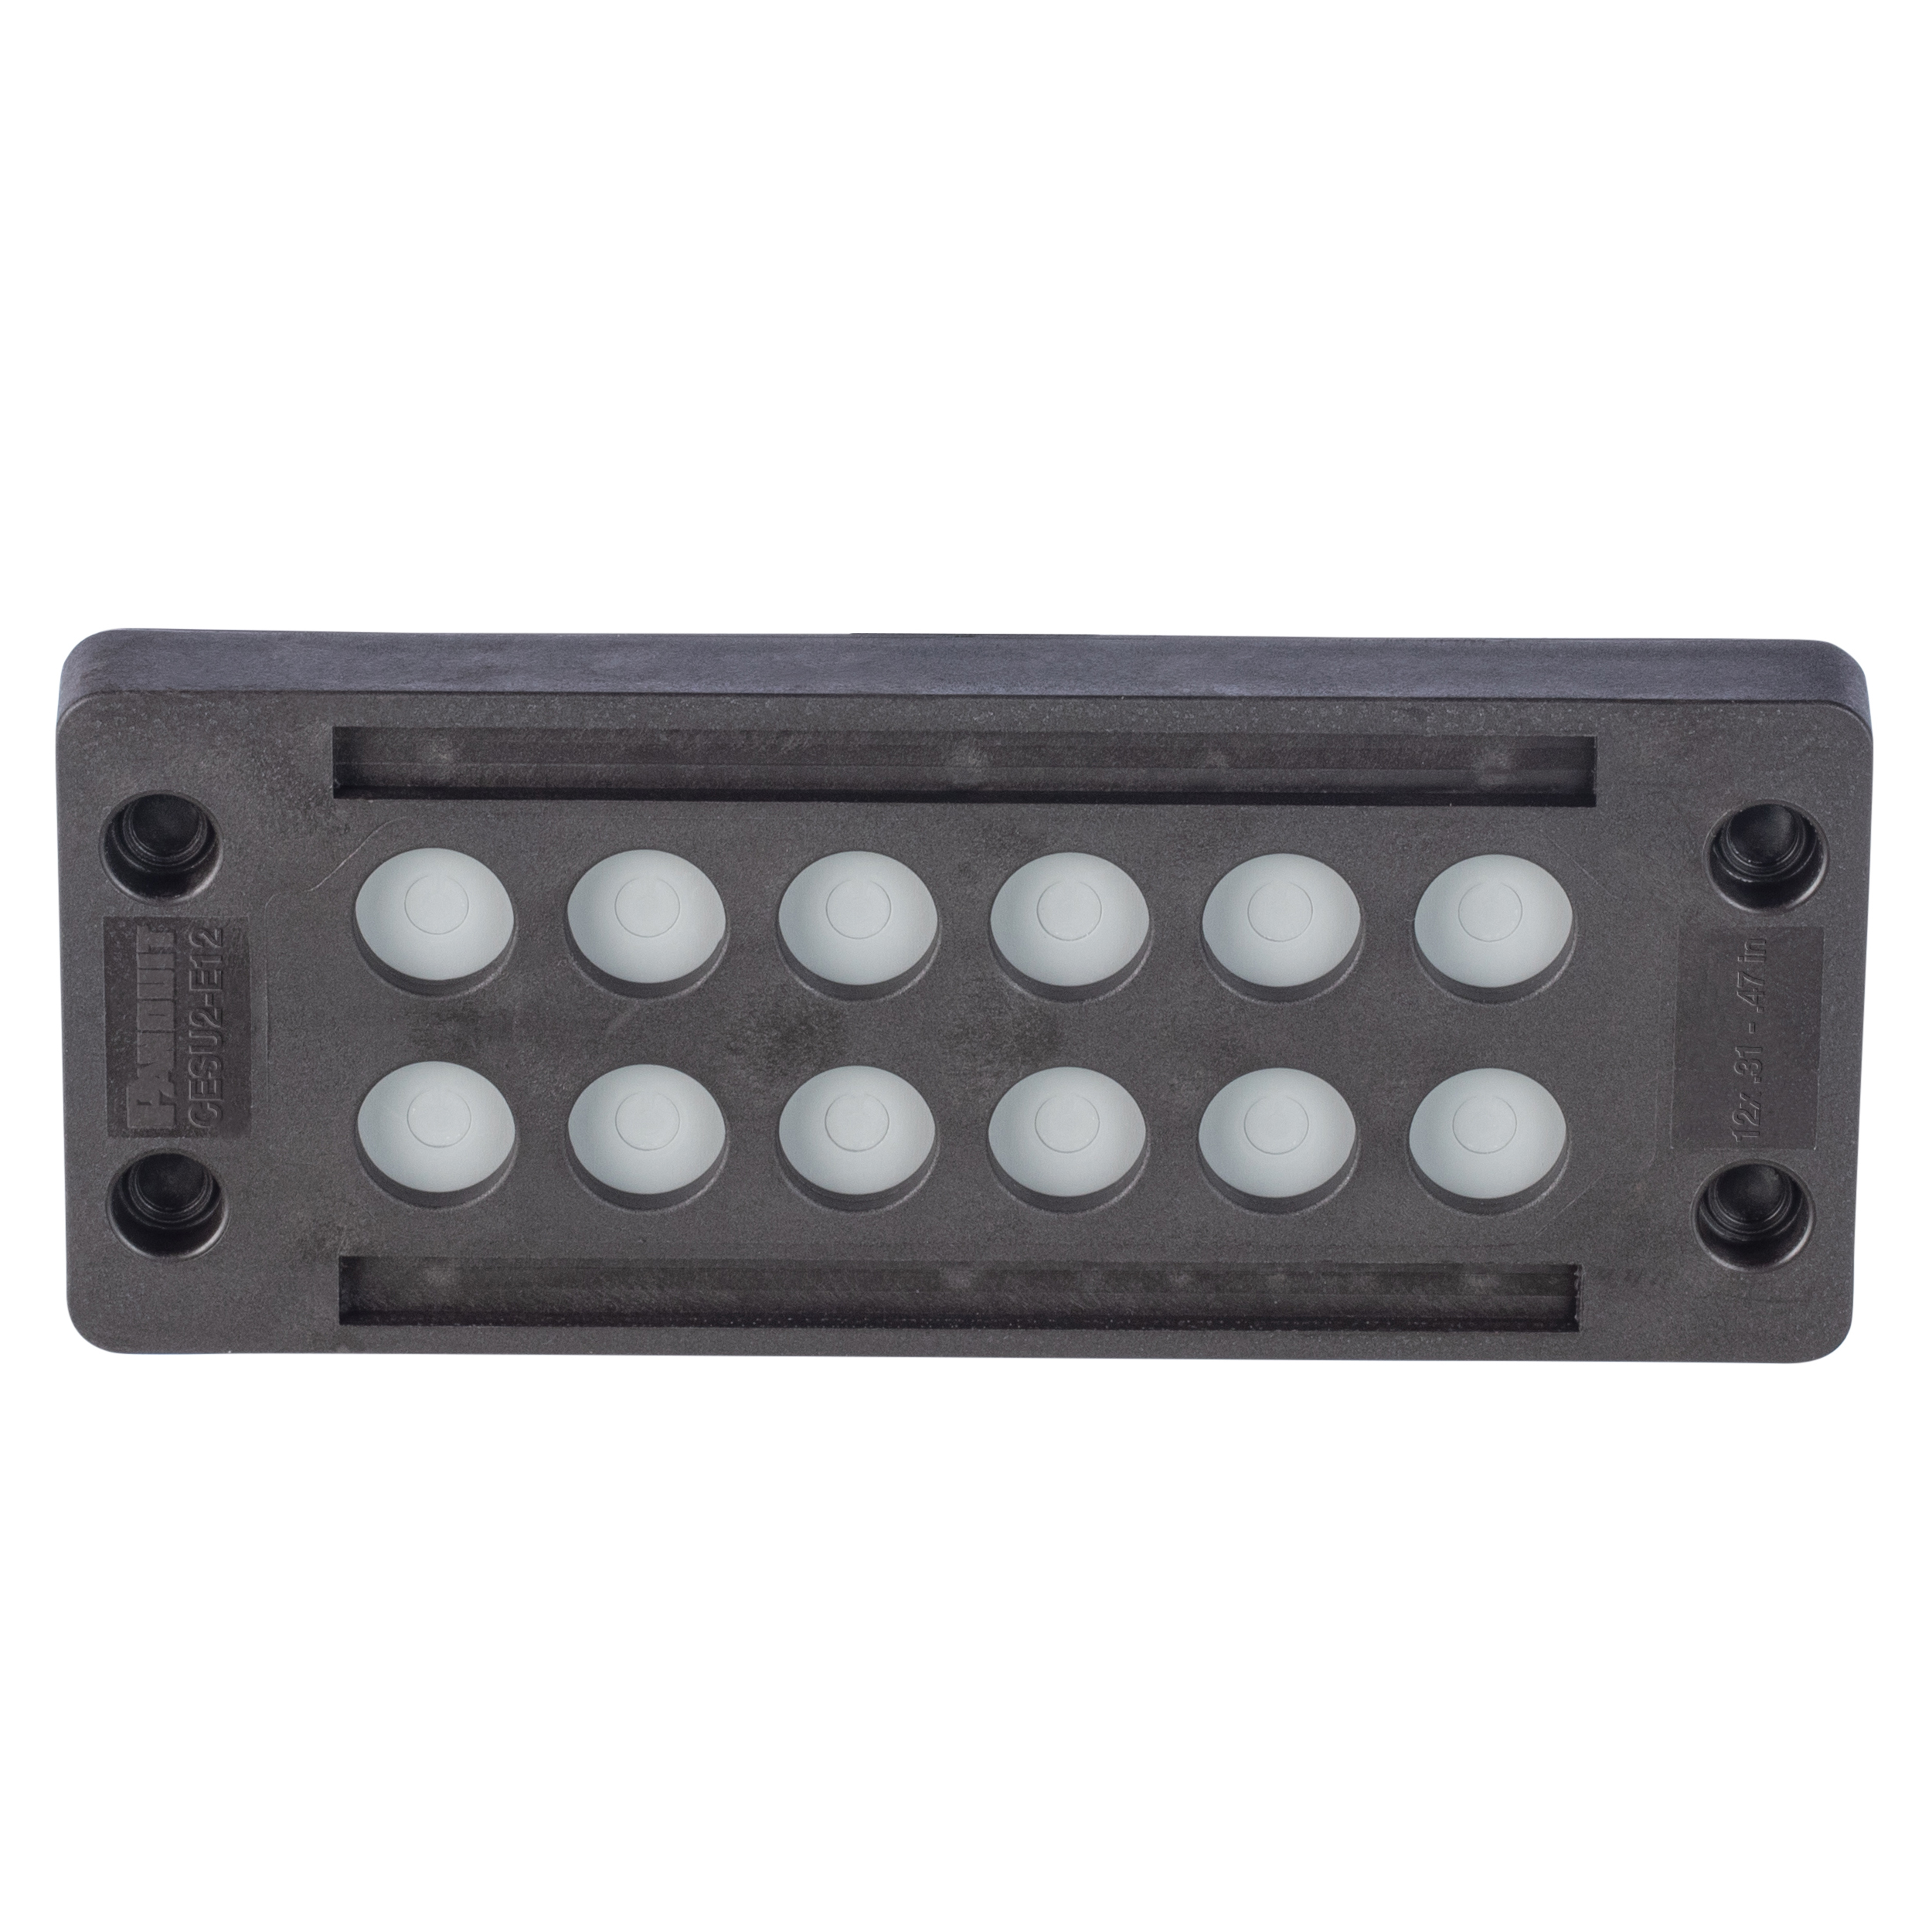 Cable Entry System, Un-Terminated, IP65, 4.41"X1.42",12 holes,1PC